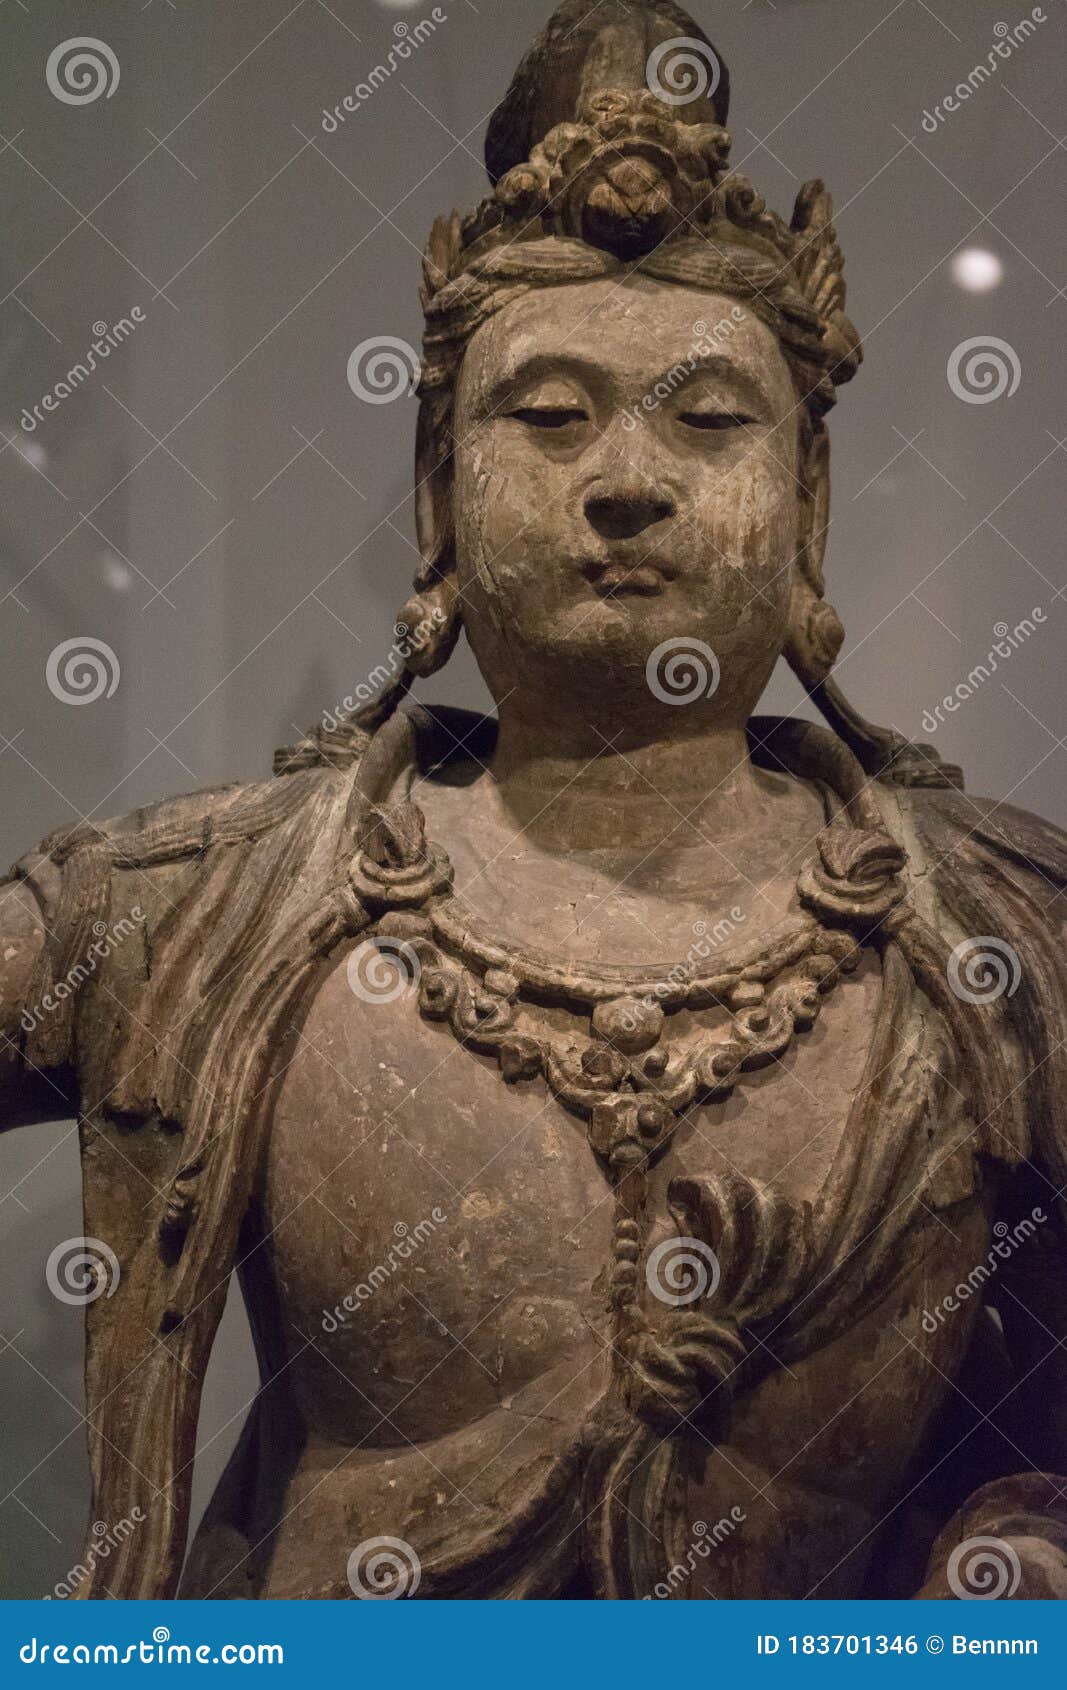 Ancient Chinese Buddha Sculpture in the Museum. Editorial Photo - Image ...